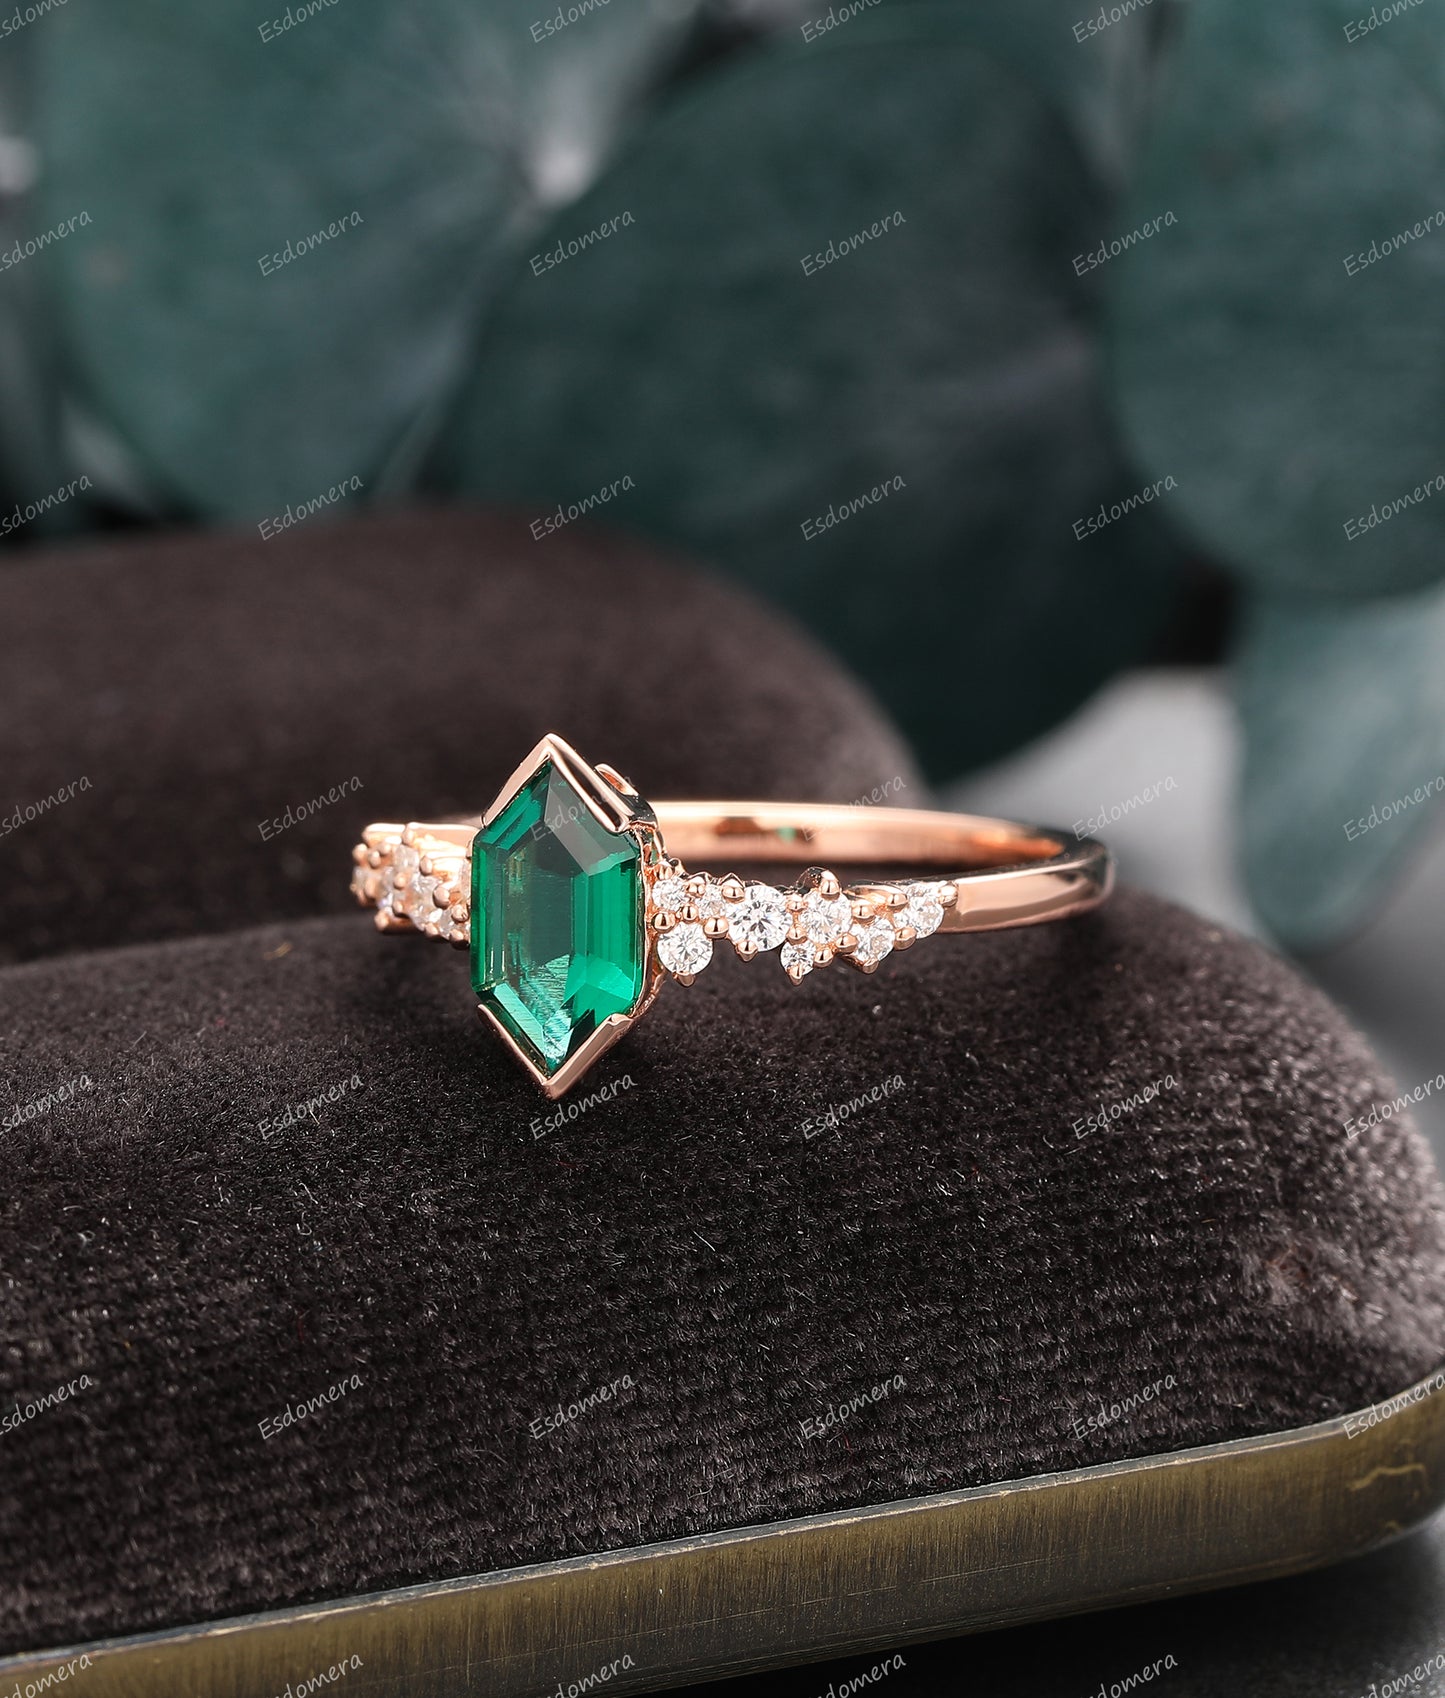 Vintage 1.10CT Long Hexagon Cut Emerald Wedding Ring, Moissanite Cluster Ring, Unique Rose Gold Statement Ring For Women